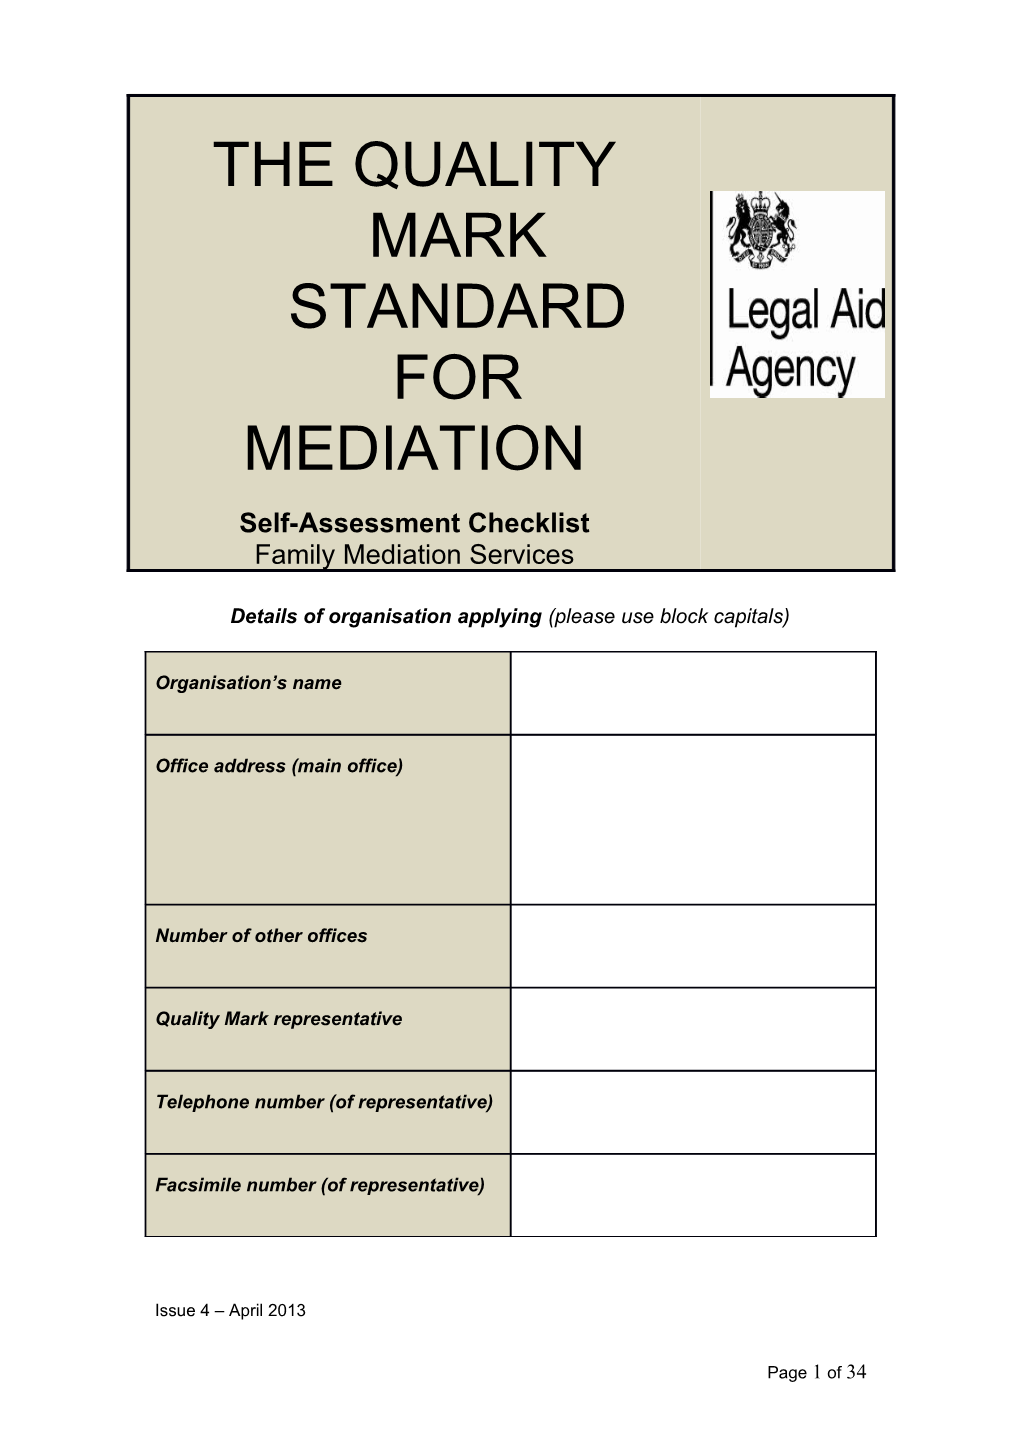 The Mediation Quality Mark